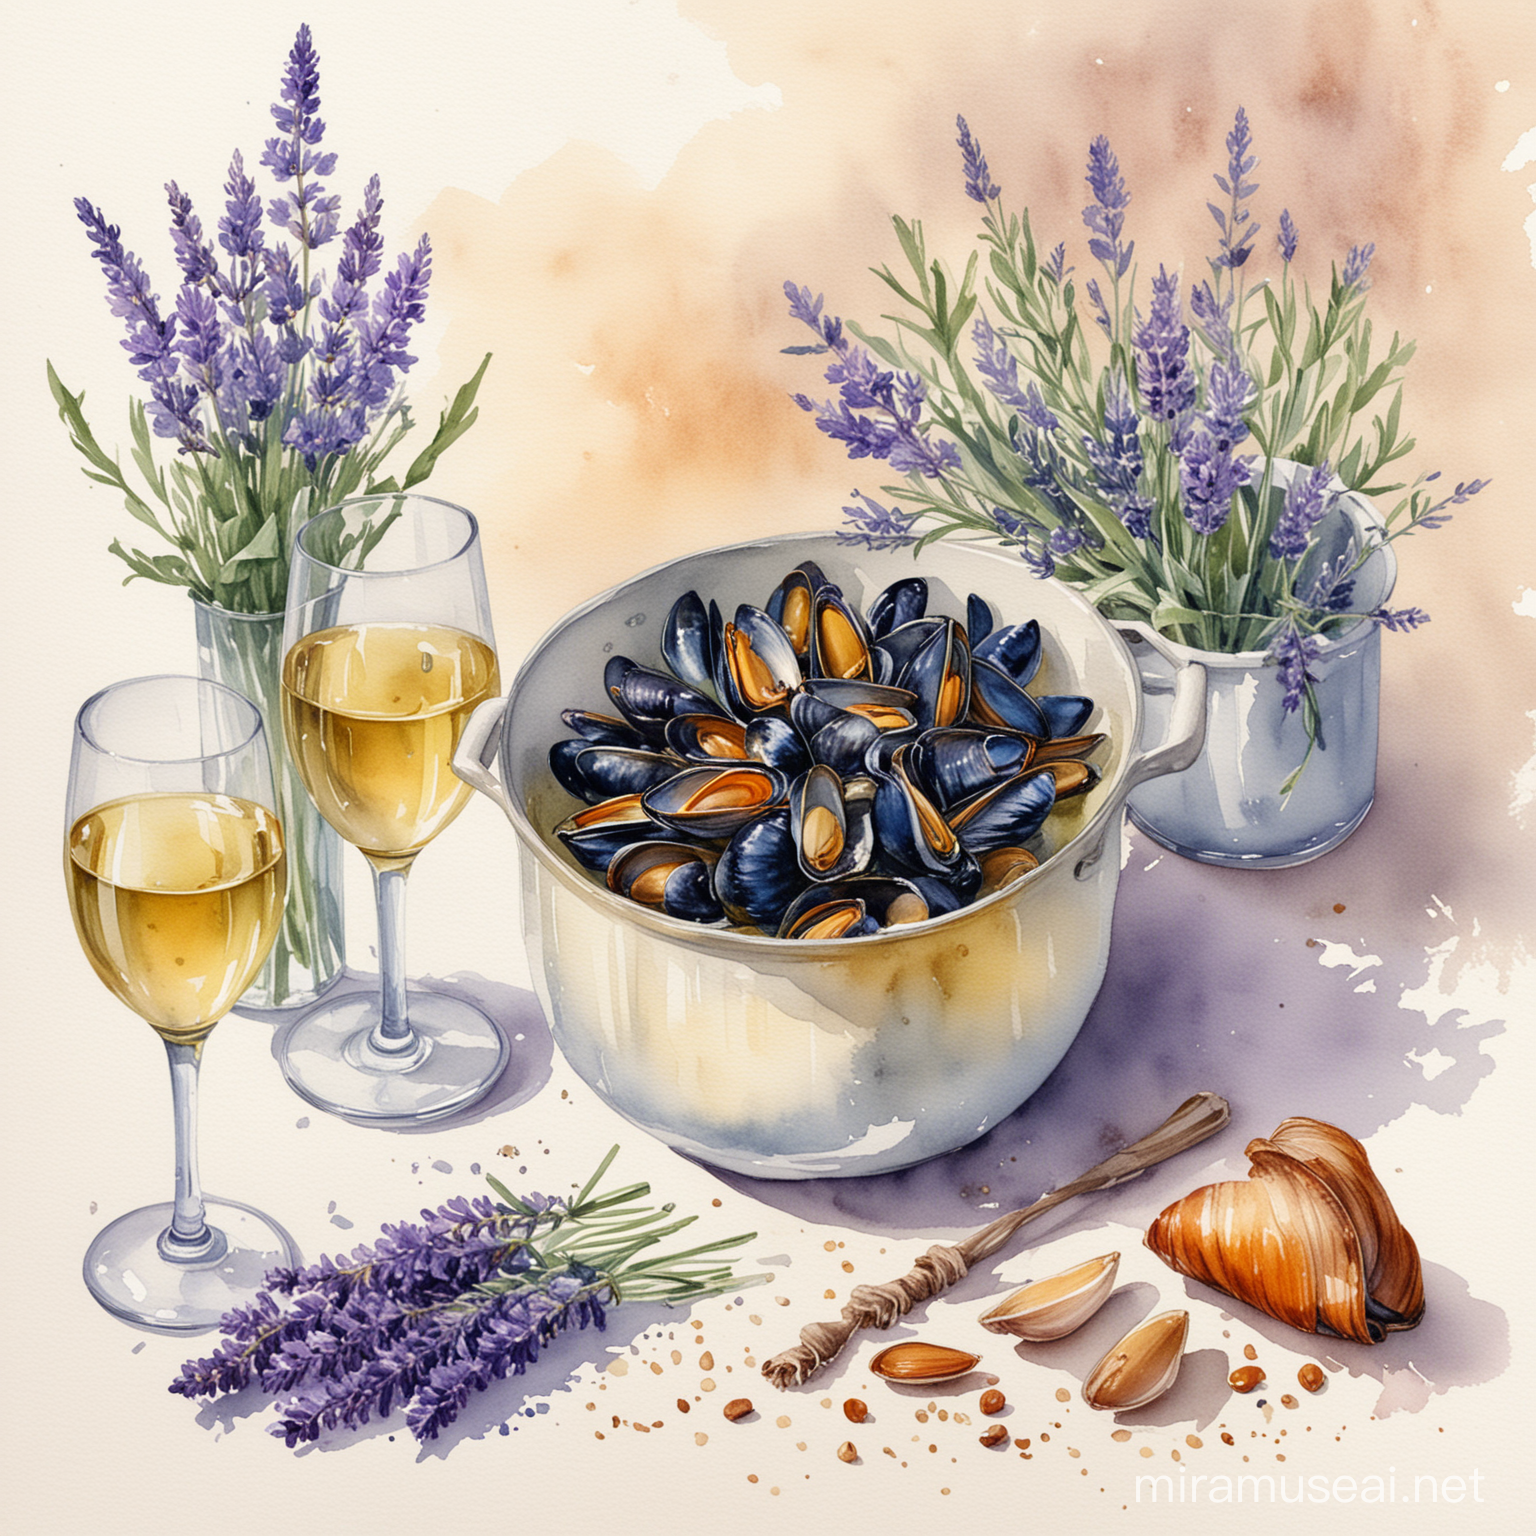 Watercolor Illustration Rustic Still Life with White Wine Garlic Lavender and Mussels